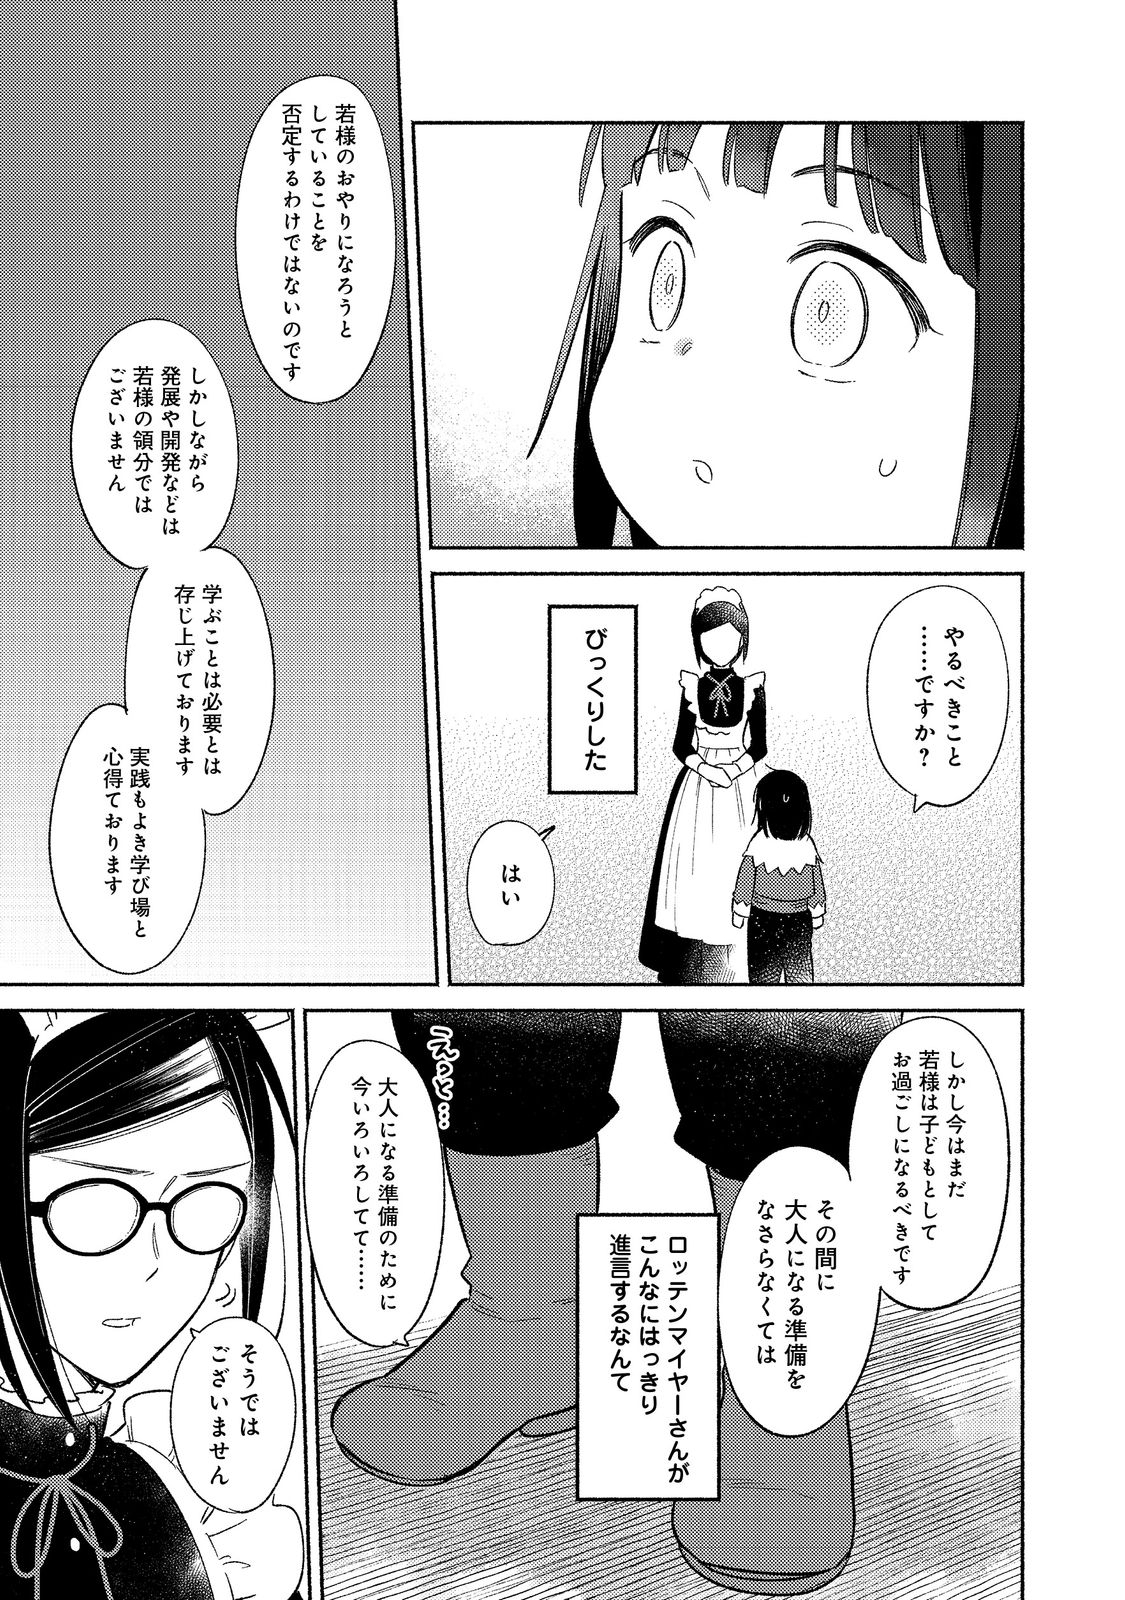 I’m the White Pig Nobleman 第16.2話 - Page 9